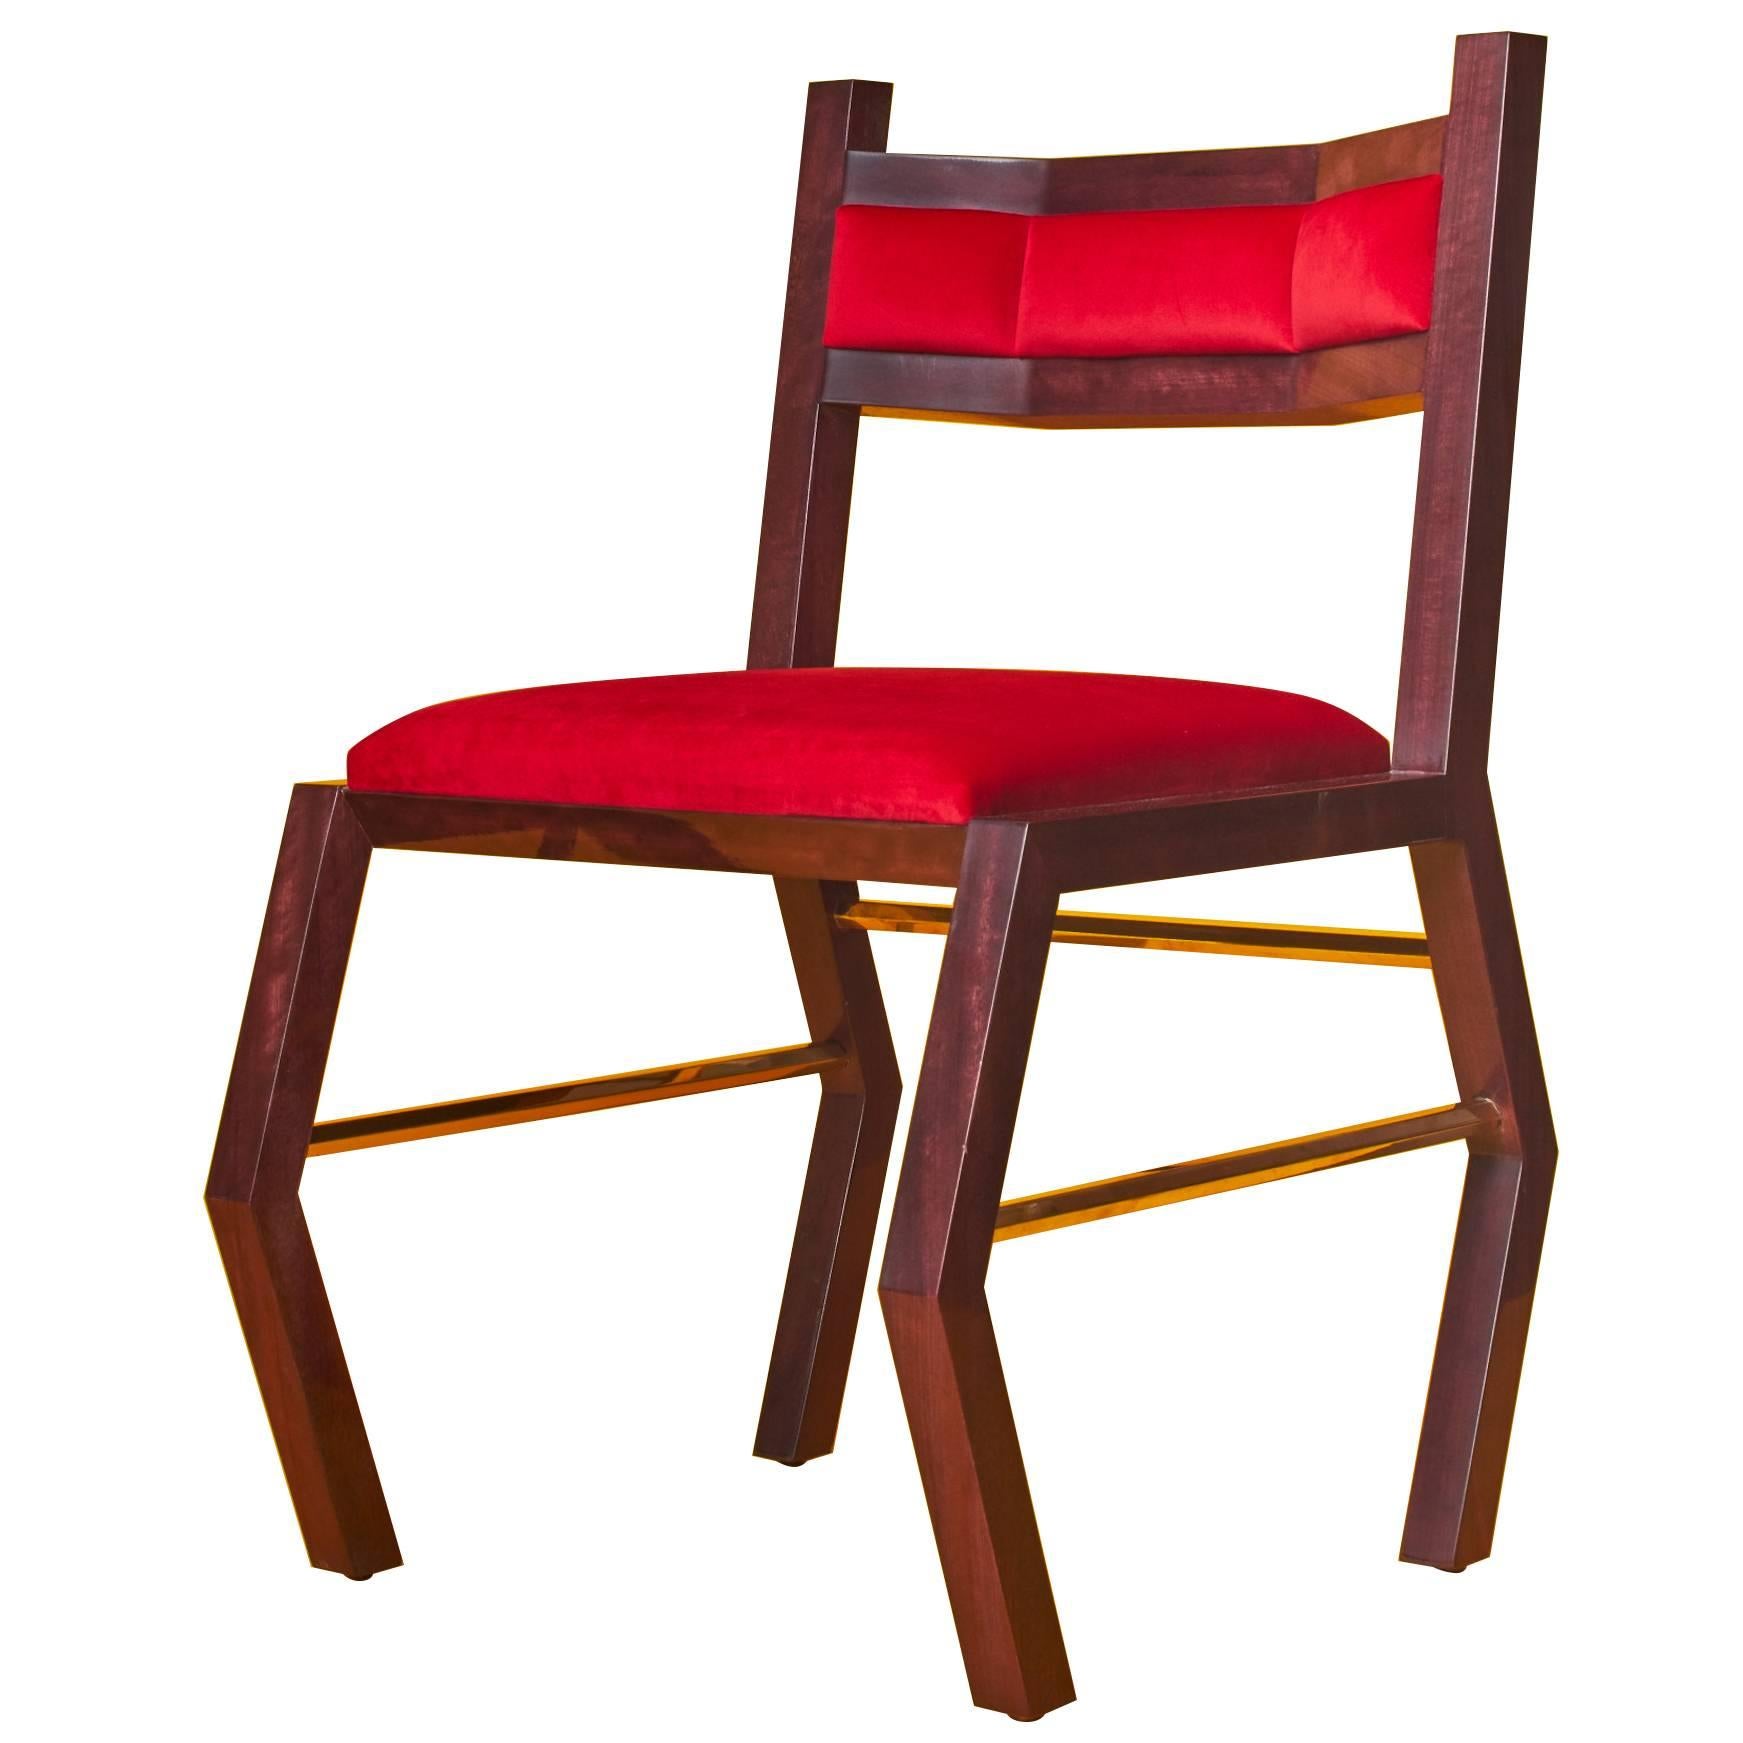 Solid Purpleheart Wood Chair With Red Velvet Upholstery And Brass For Sale